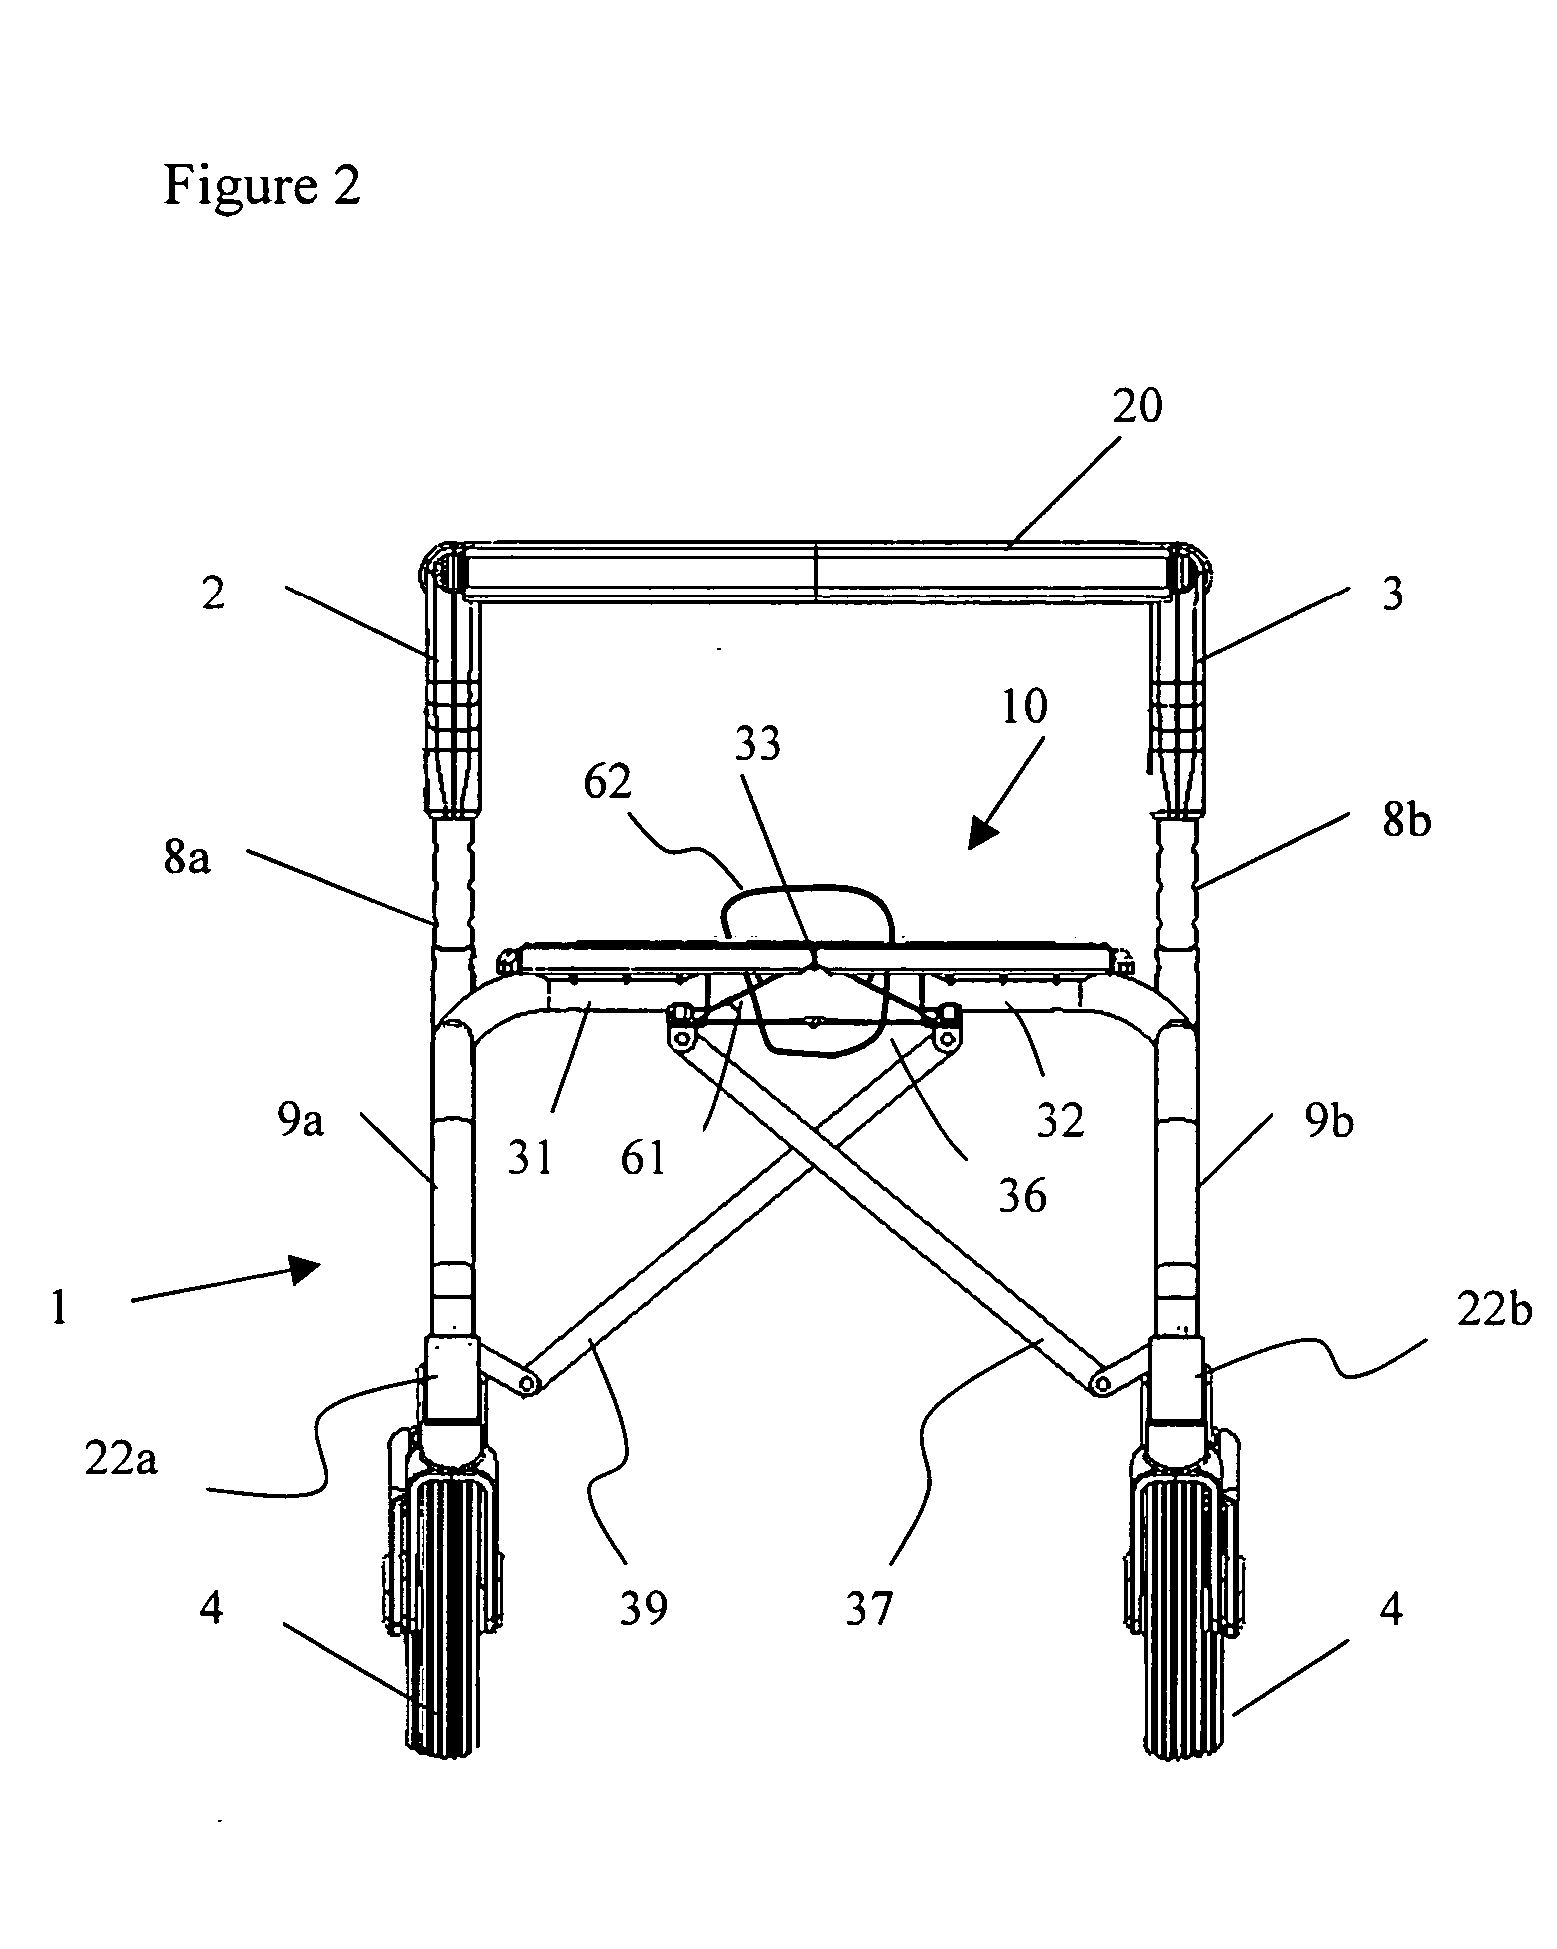 Mobility aiding device